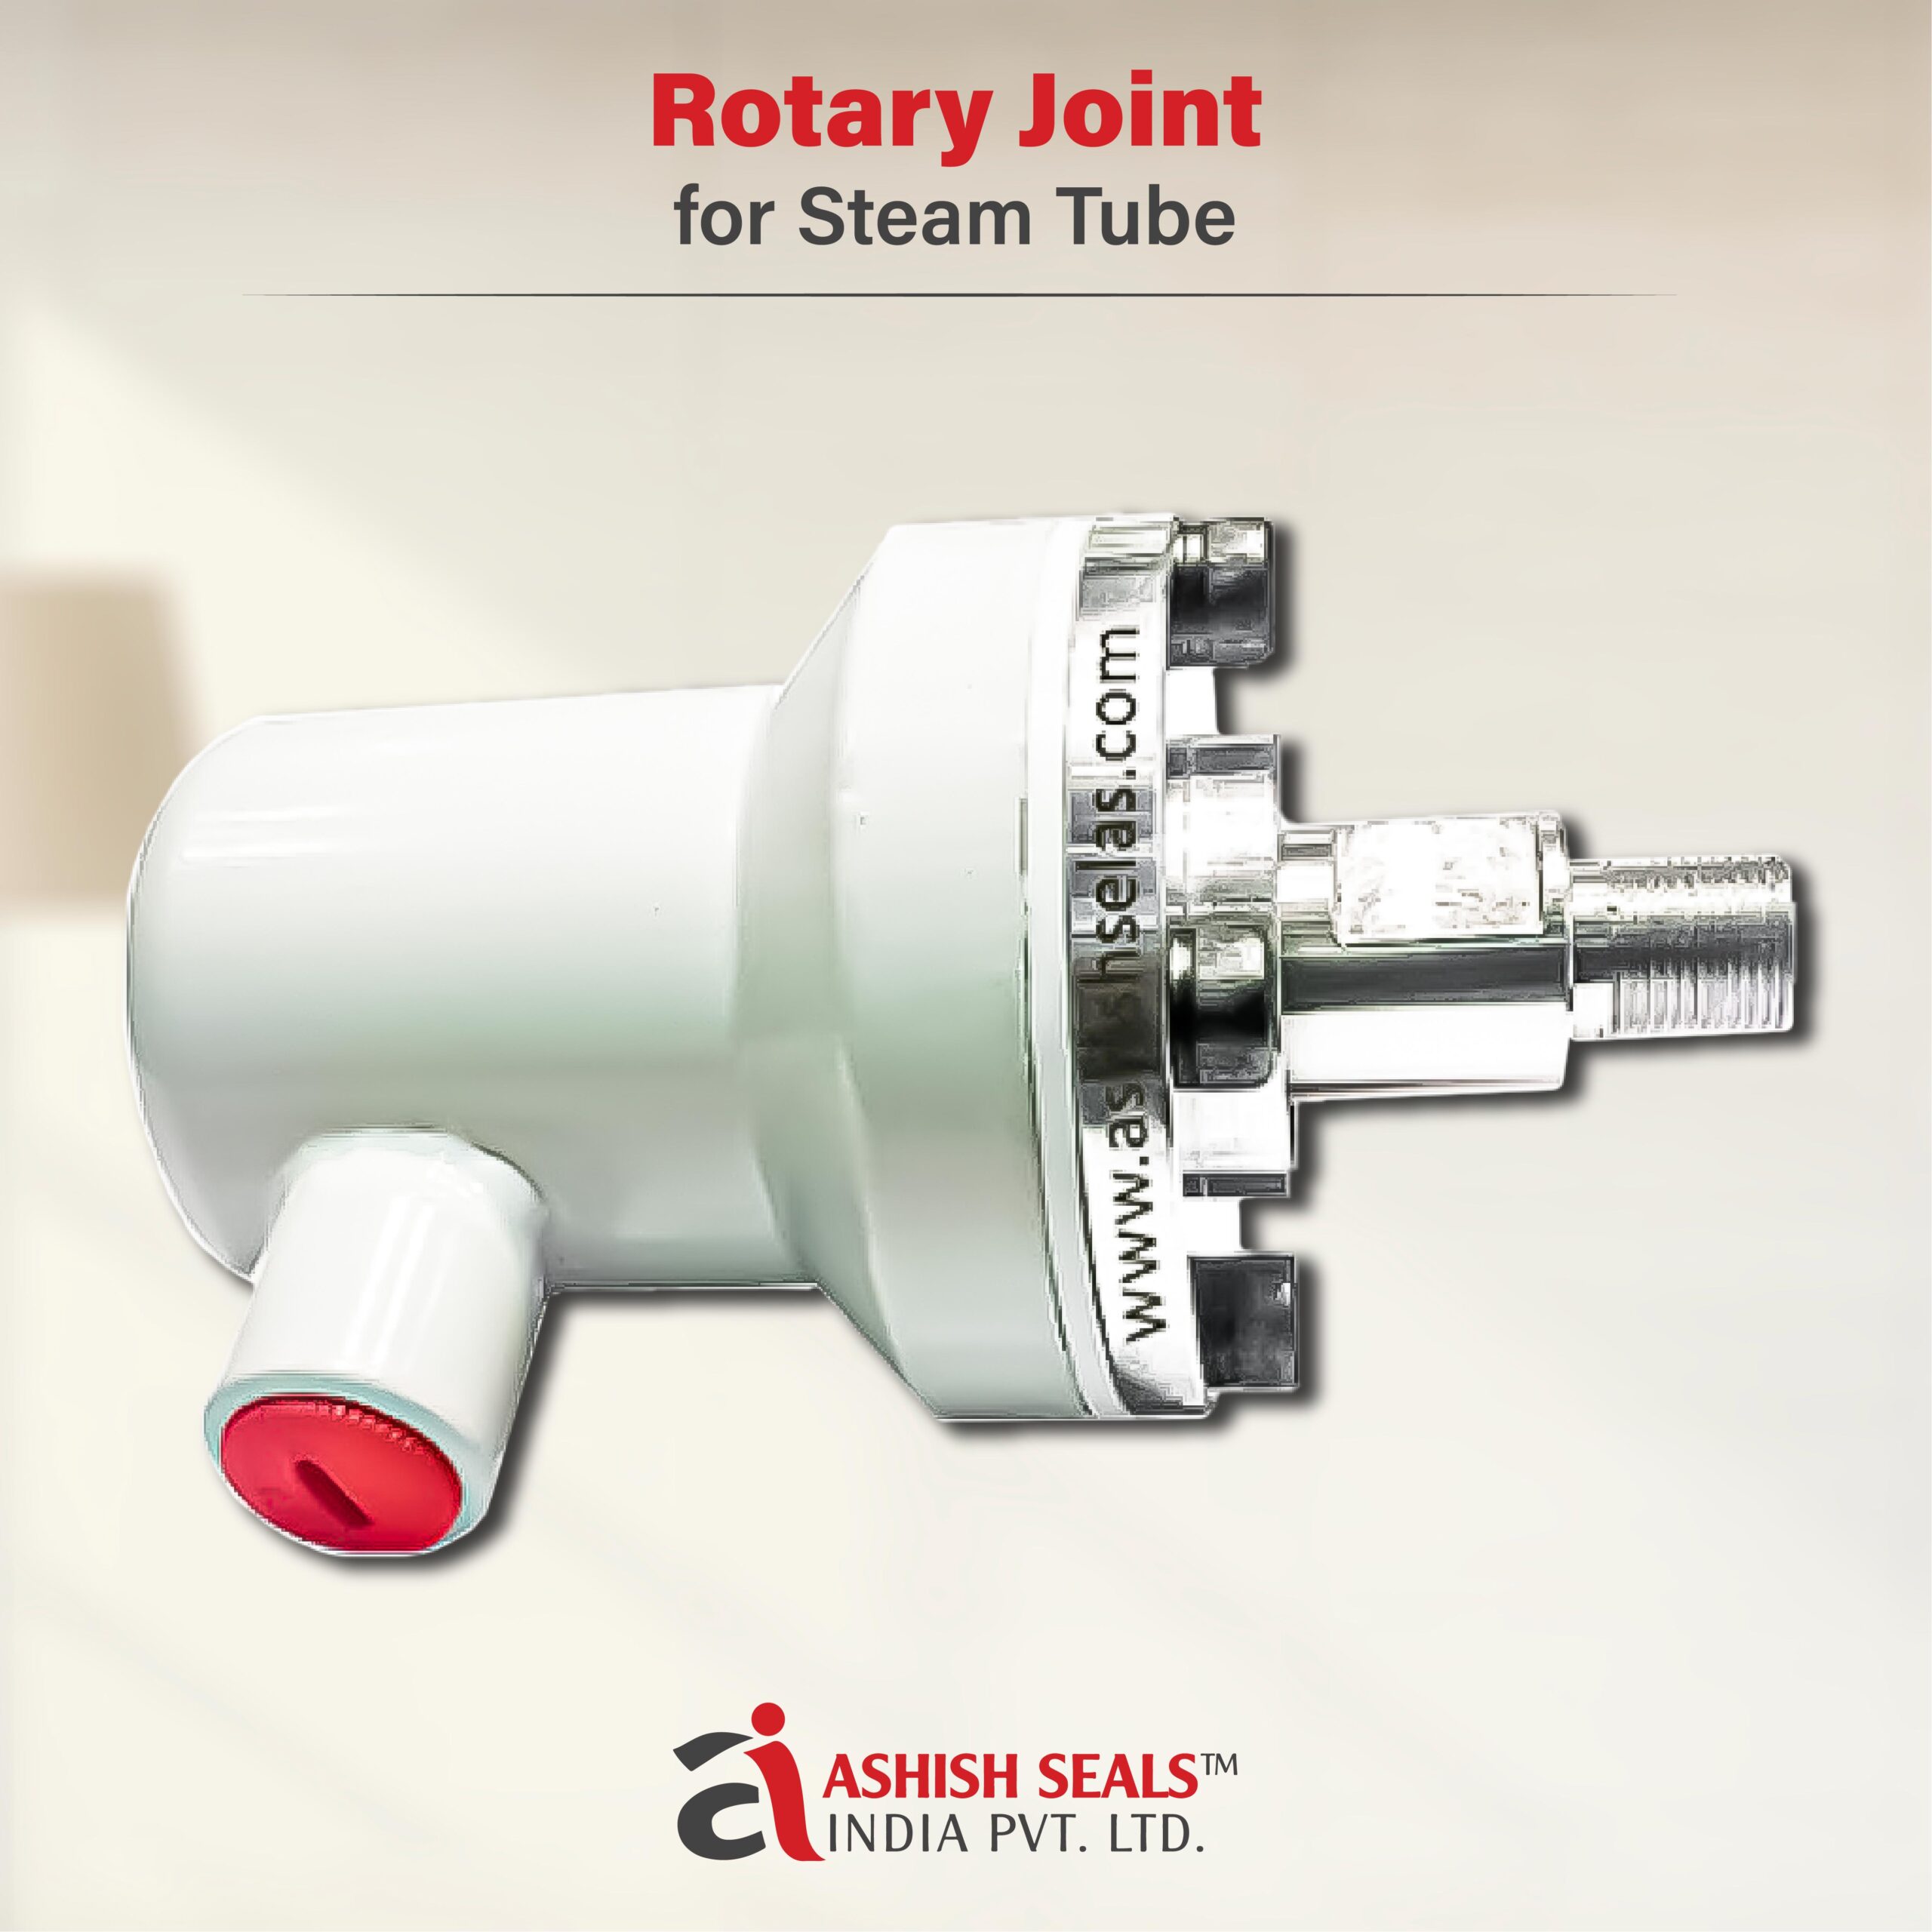 Rotary Joints for Steam Tube